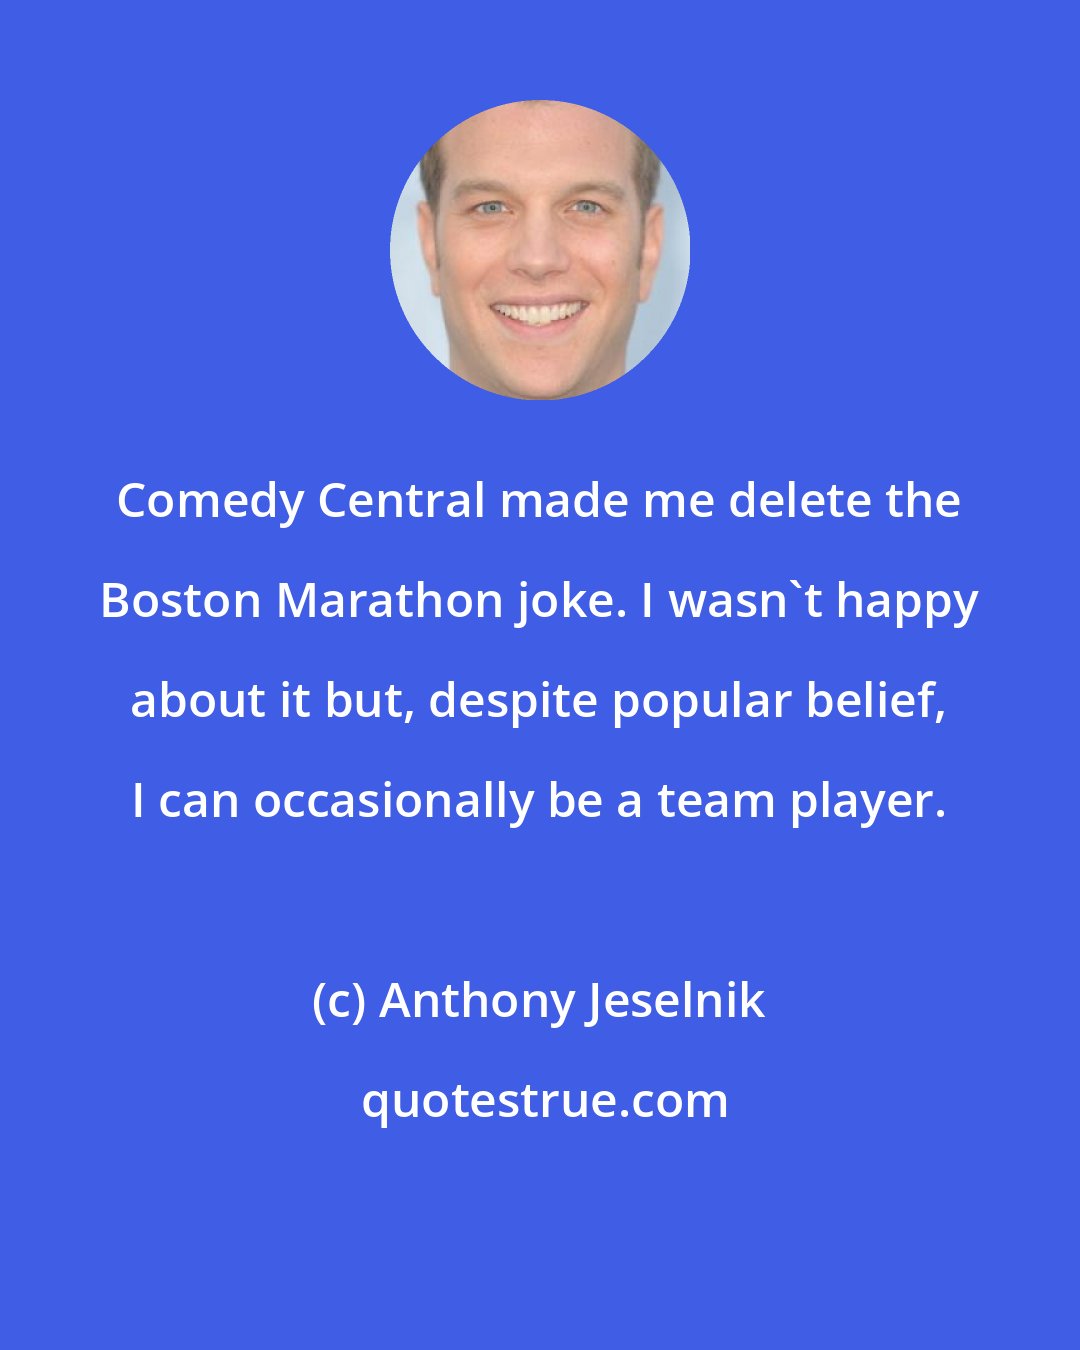 Anthony Jeselnik: Comedy Central made me delete the Boston Marathon joke. I wasn't happy about it but, despite popular belief, I can occasionally be a team player.